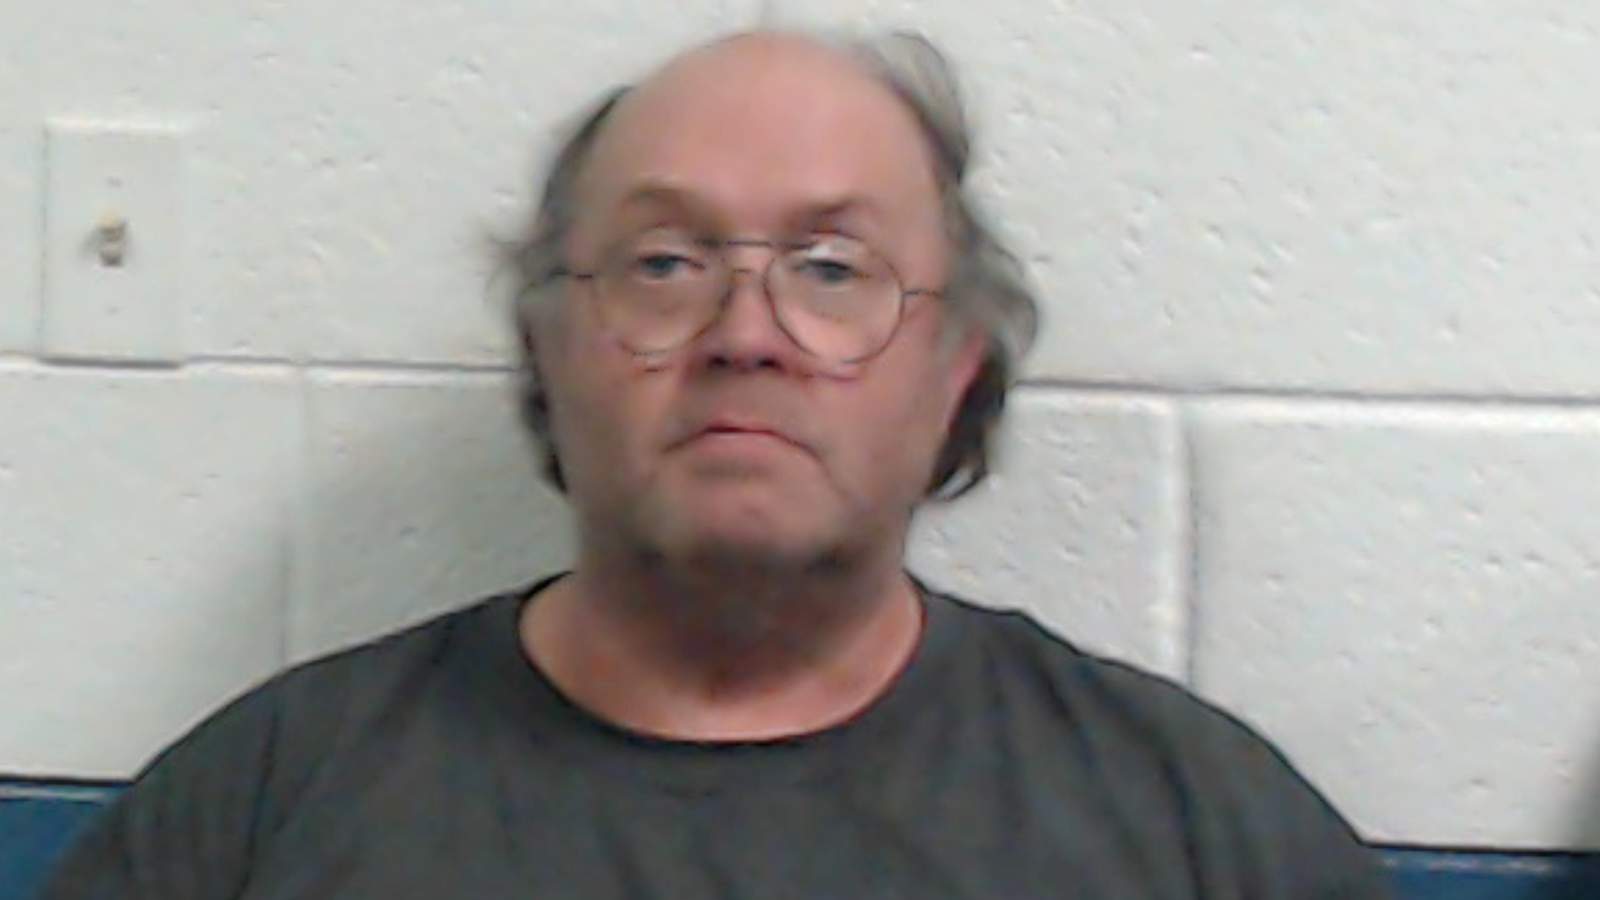 Man arrested, charged with murder, hit-and-run in connection with body found near Bland County gas station